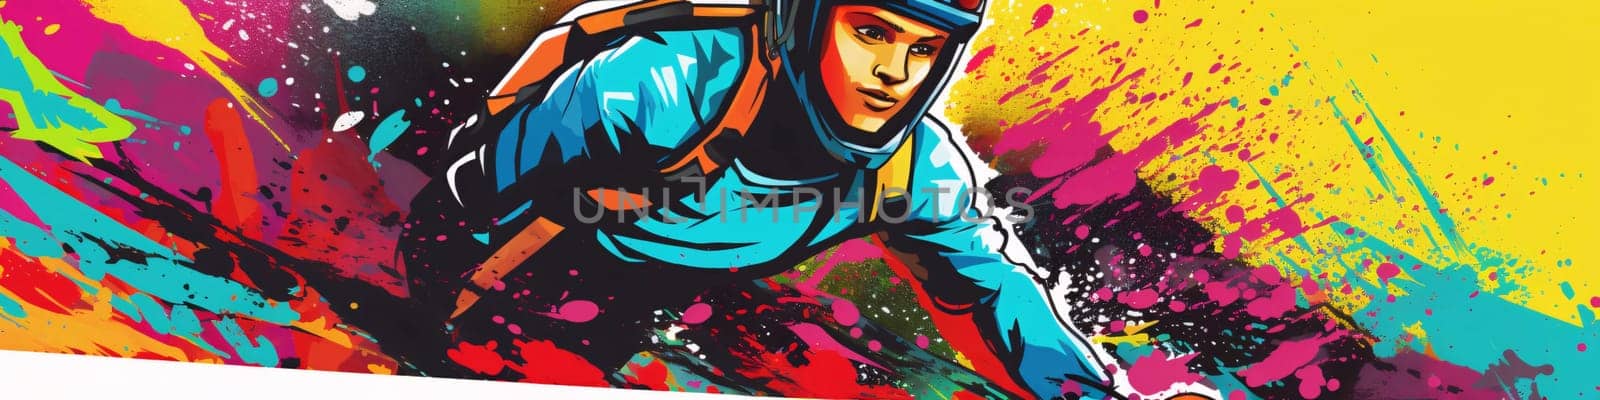 Colorful background with a motocross rider. Vector illustration. by ThemesS